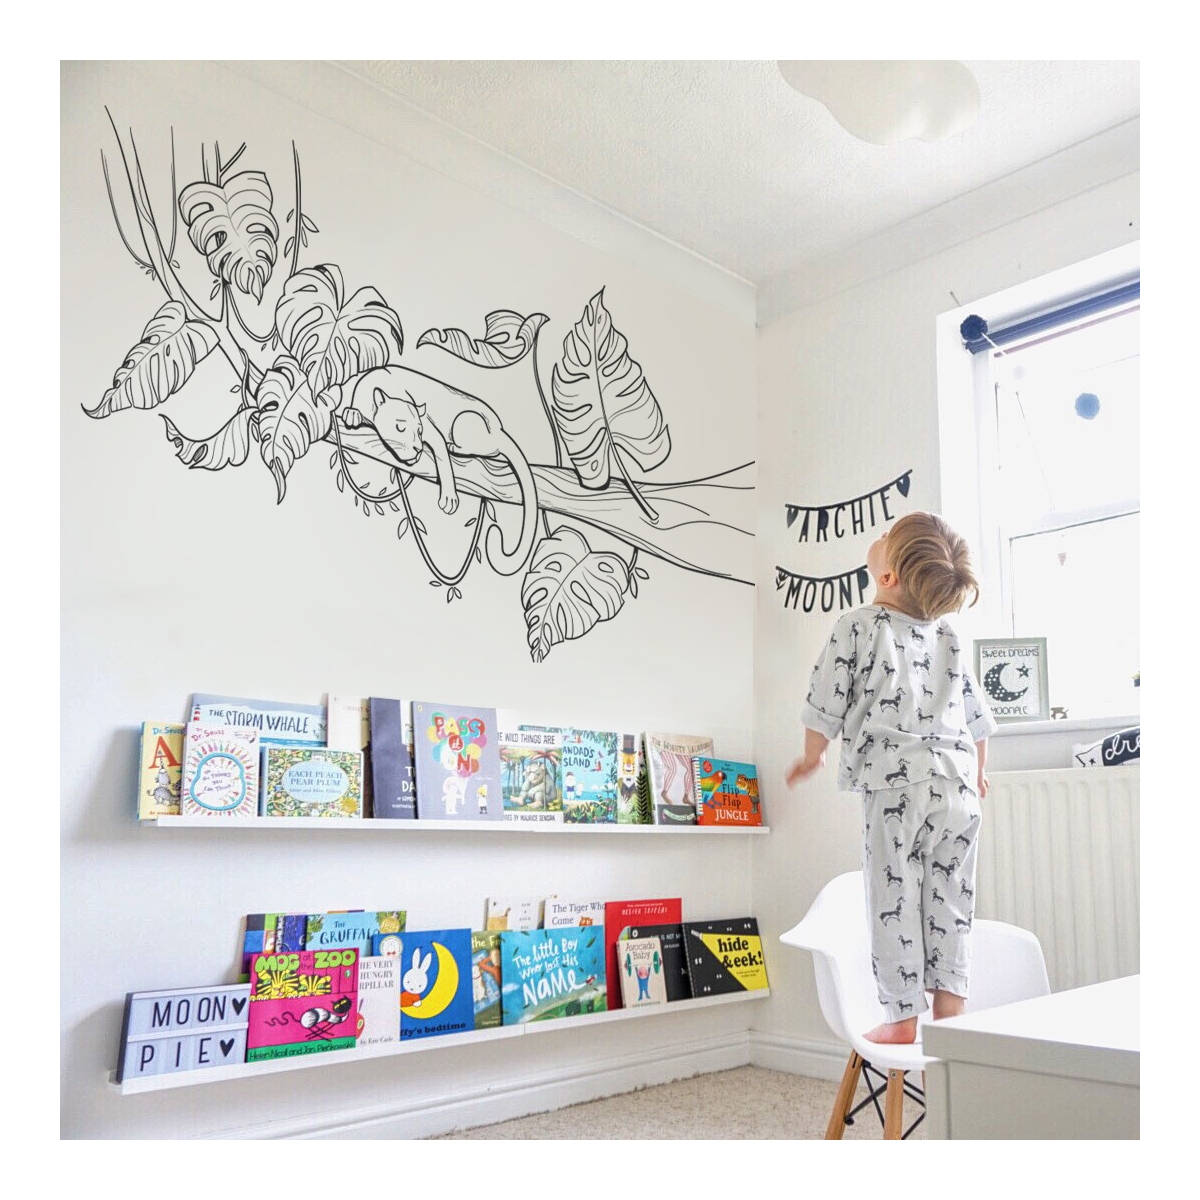 Panther wall sticker for children